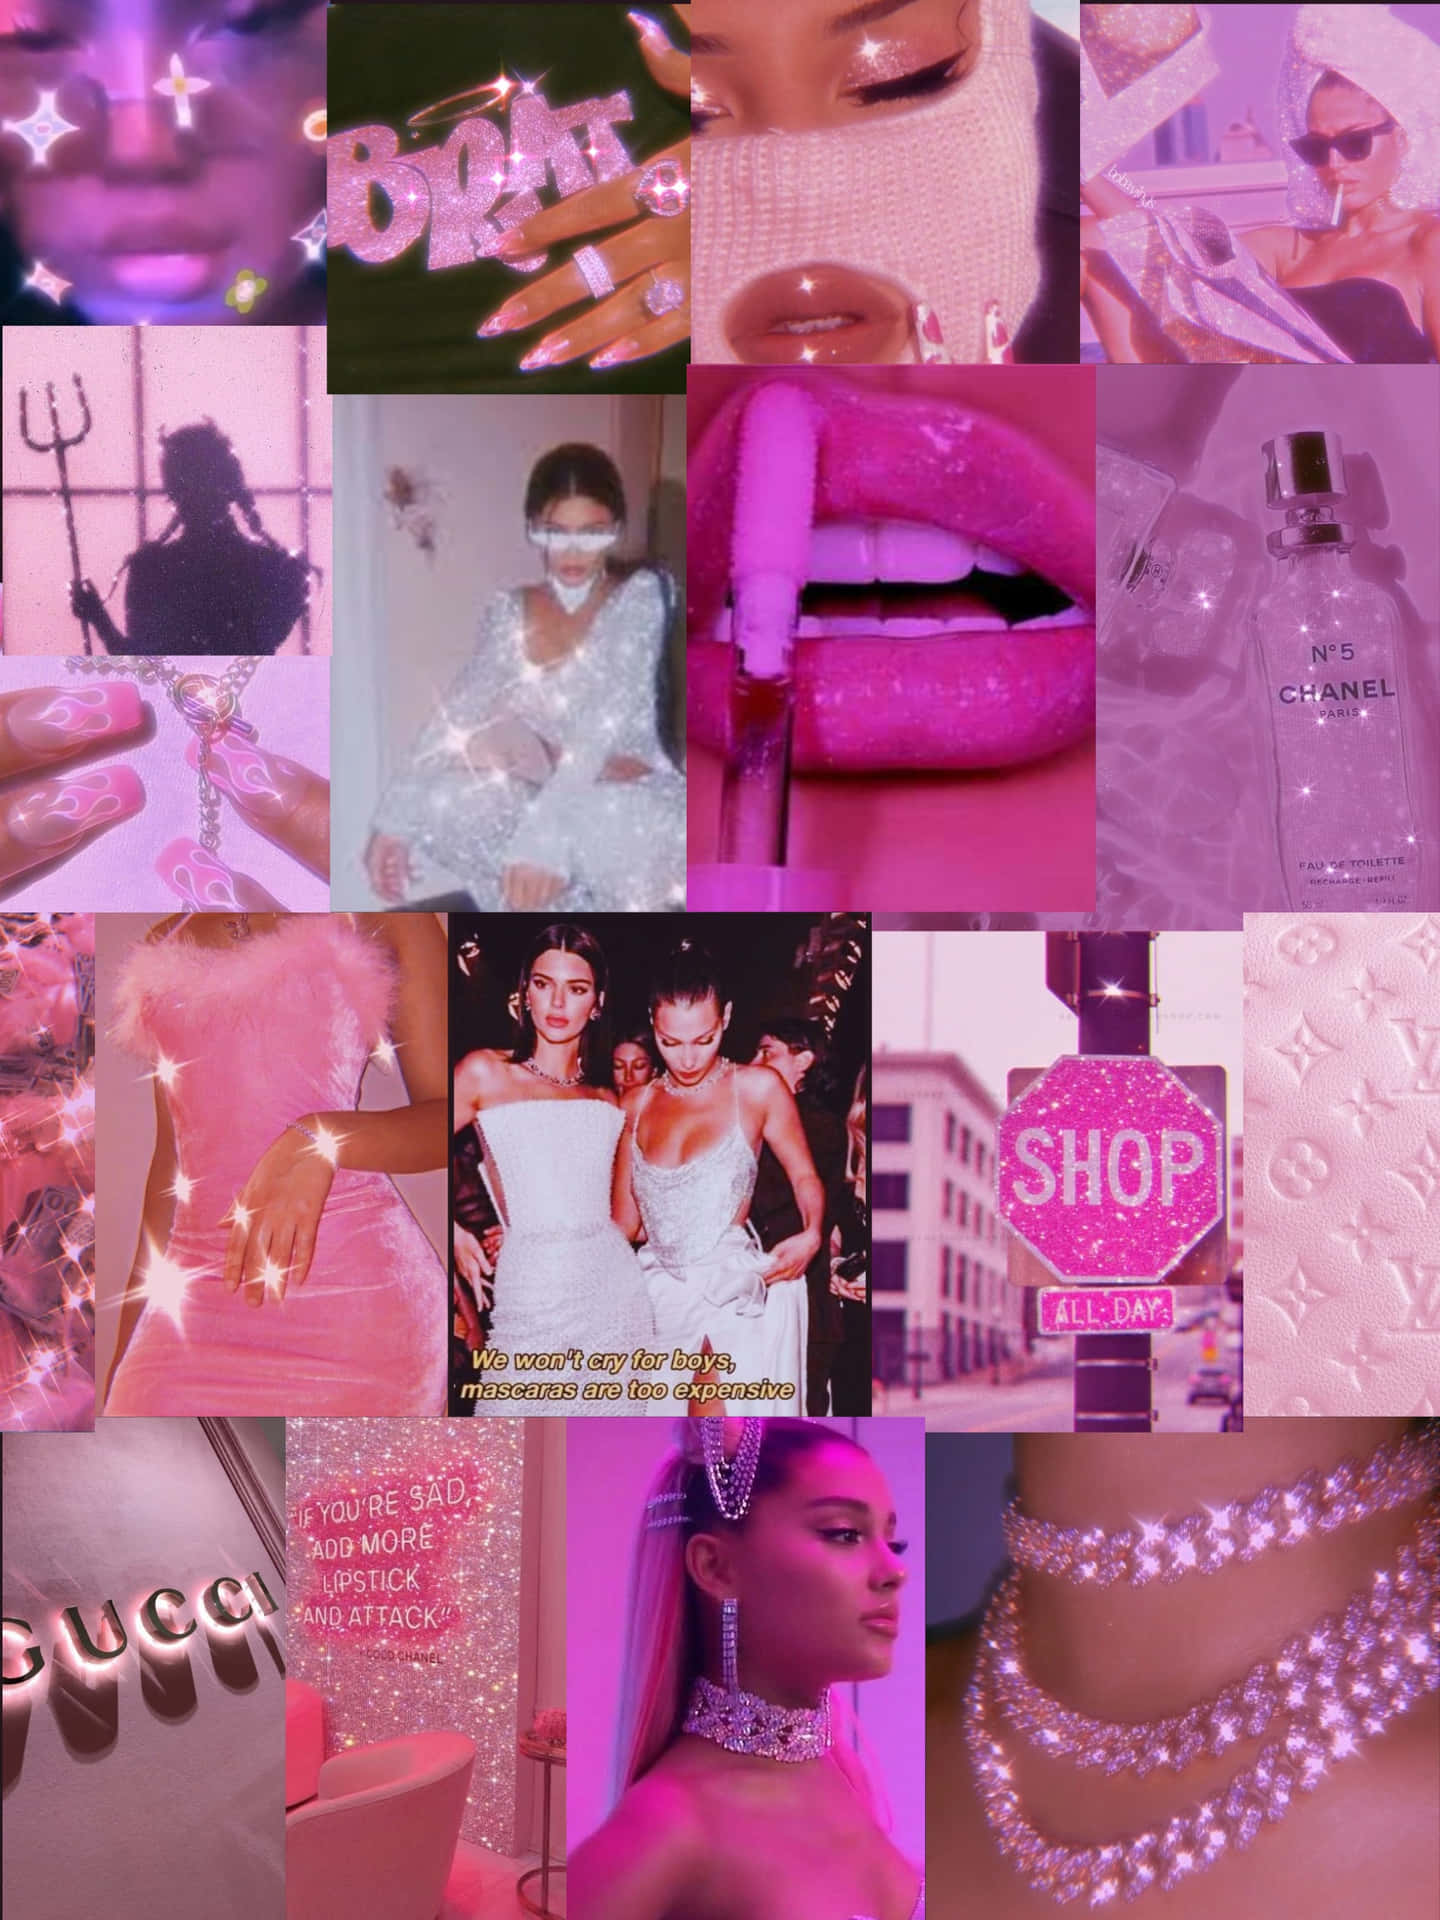 Dive deep into your aesthetic side with Baddie Aesthetic